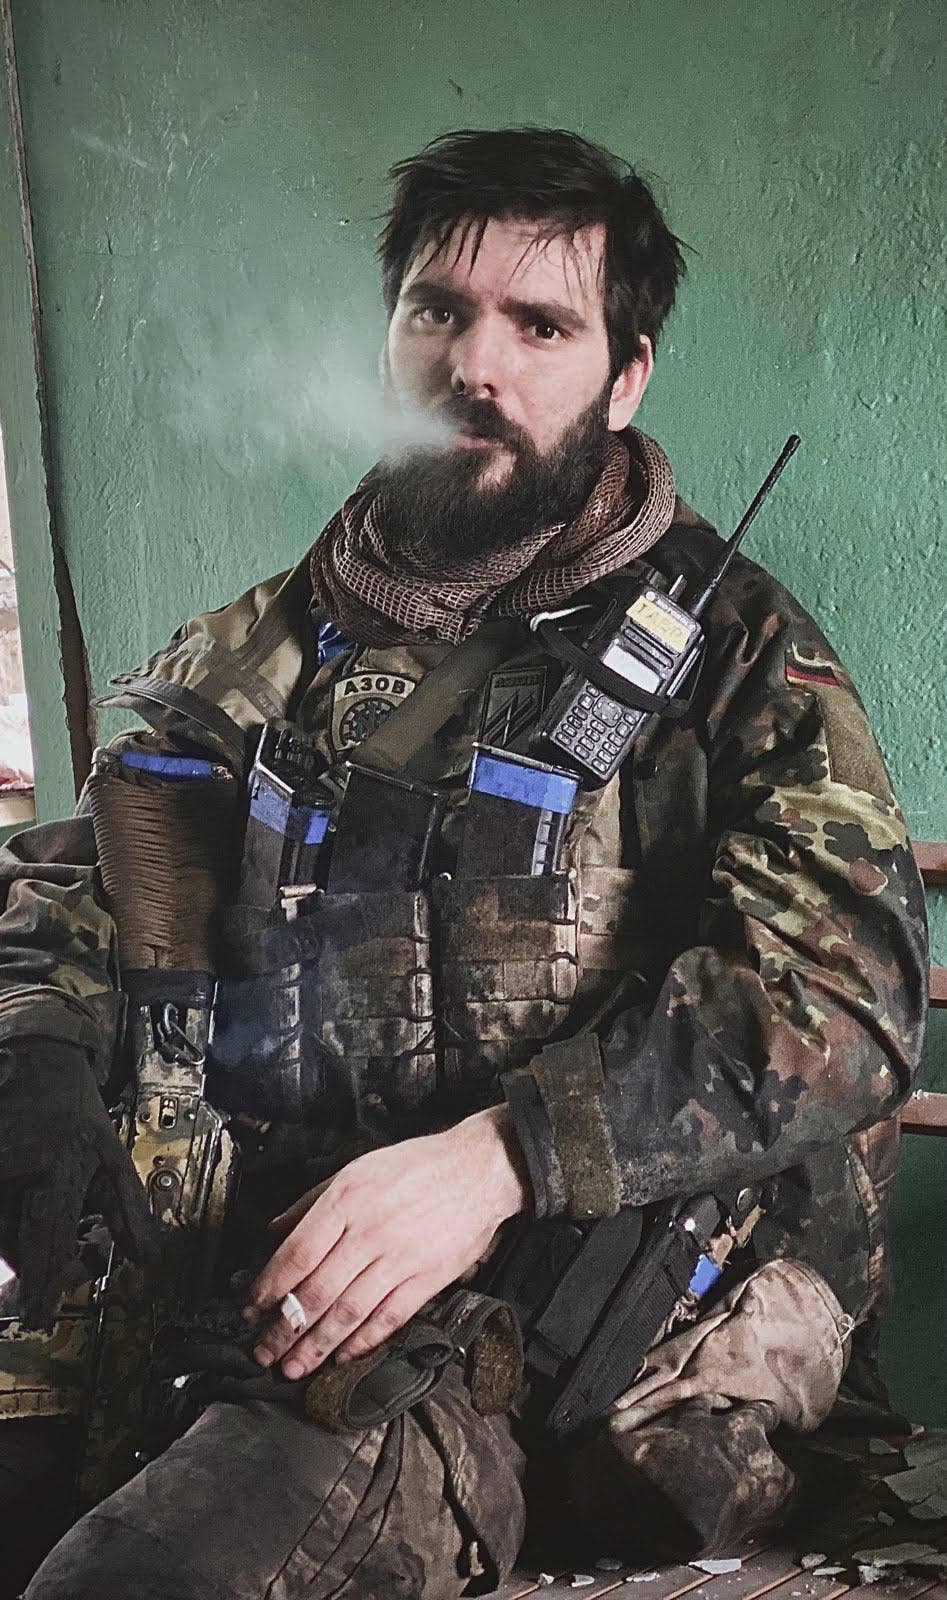 Bohdan Krotevych, a major in the National Guard of Ukraine and chief of staff of the Azov Regiment, inside the Azovstal steel plant. It was the last picture he shared with <em>The War Zone</em>. (<em>Bohdan Krotevych photo)</em>